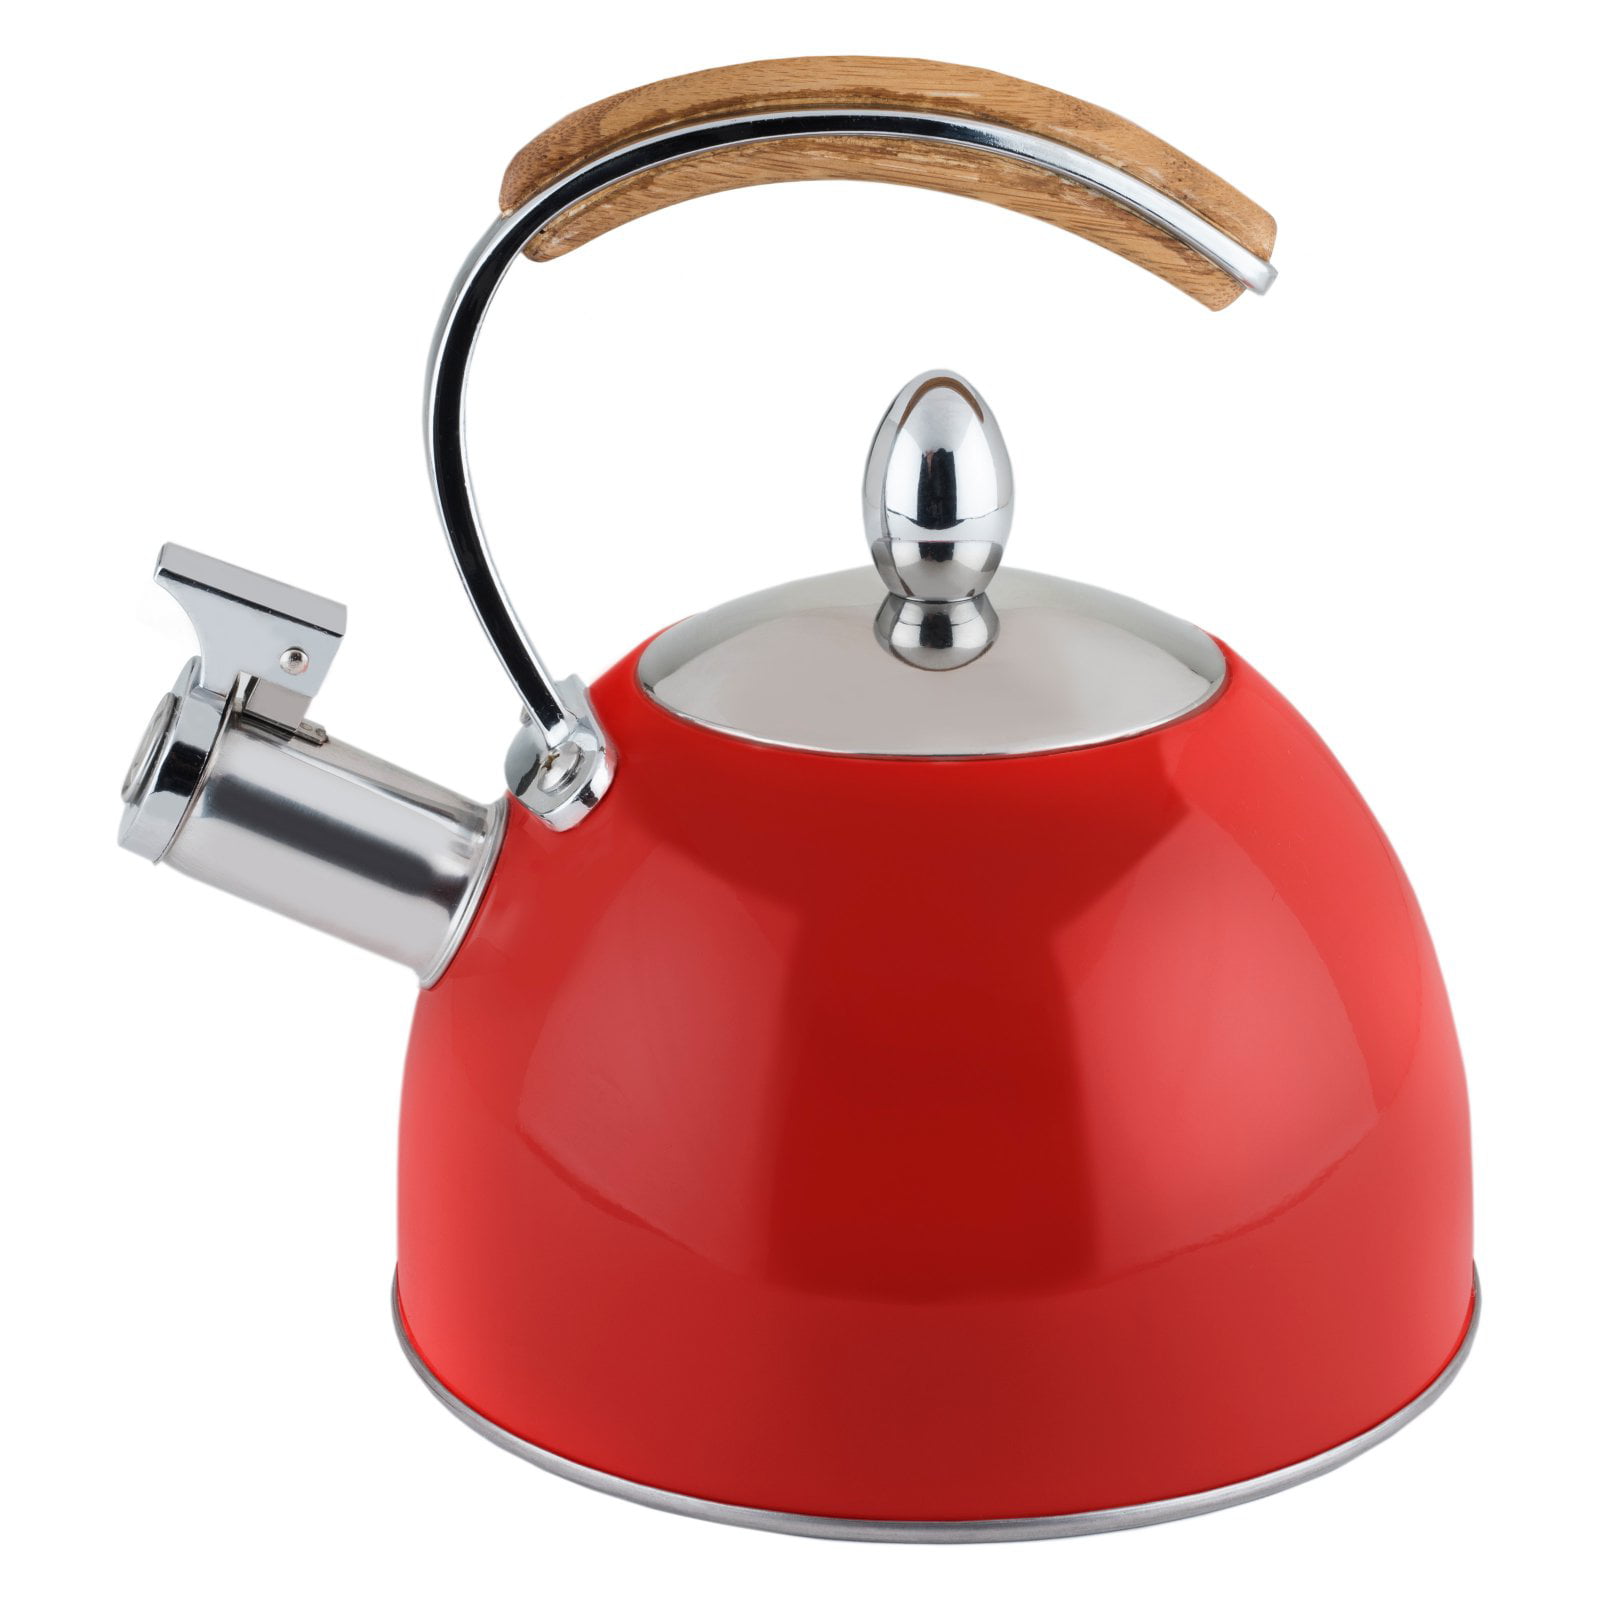 KitchenAid® 2.0-Quart Kettle with C Handle and Trim Band, Empire 